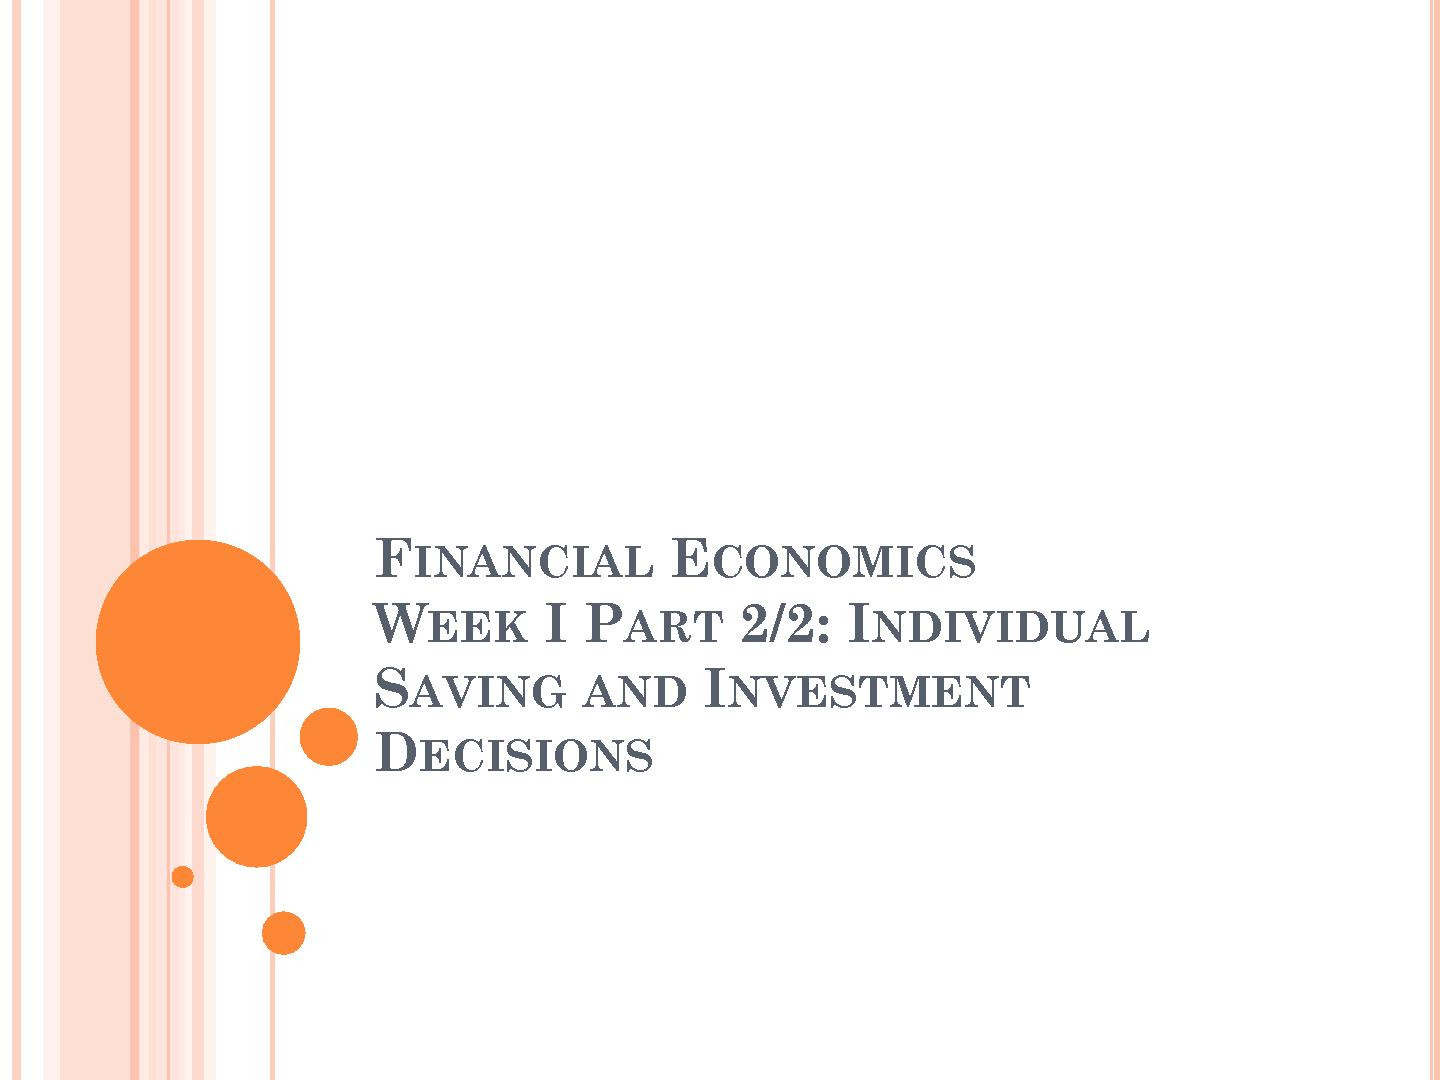 FINANCIAL ECONOMICS WEEK I PART 2/2: INDIVIDUAL SAVING AND INVESTMENT DECISIONS